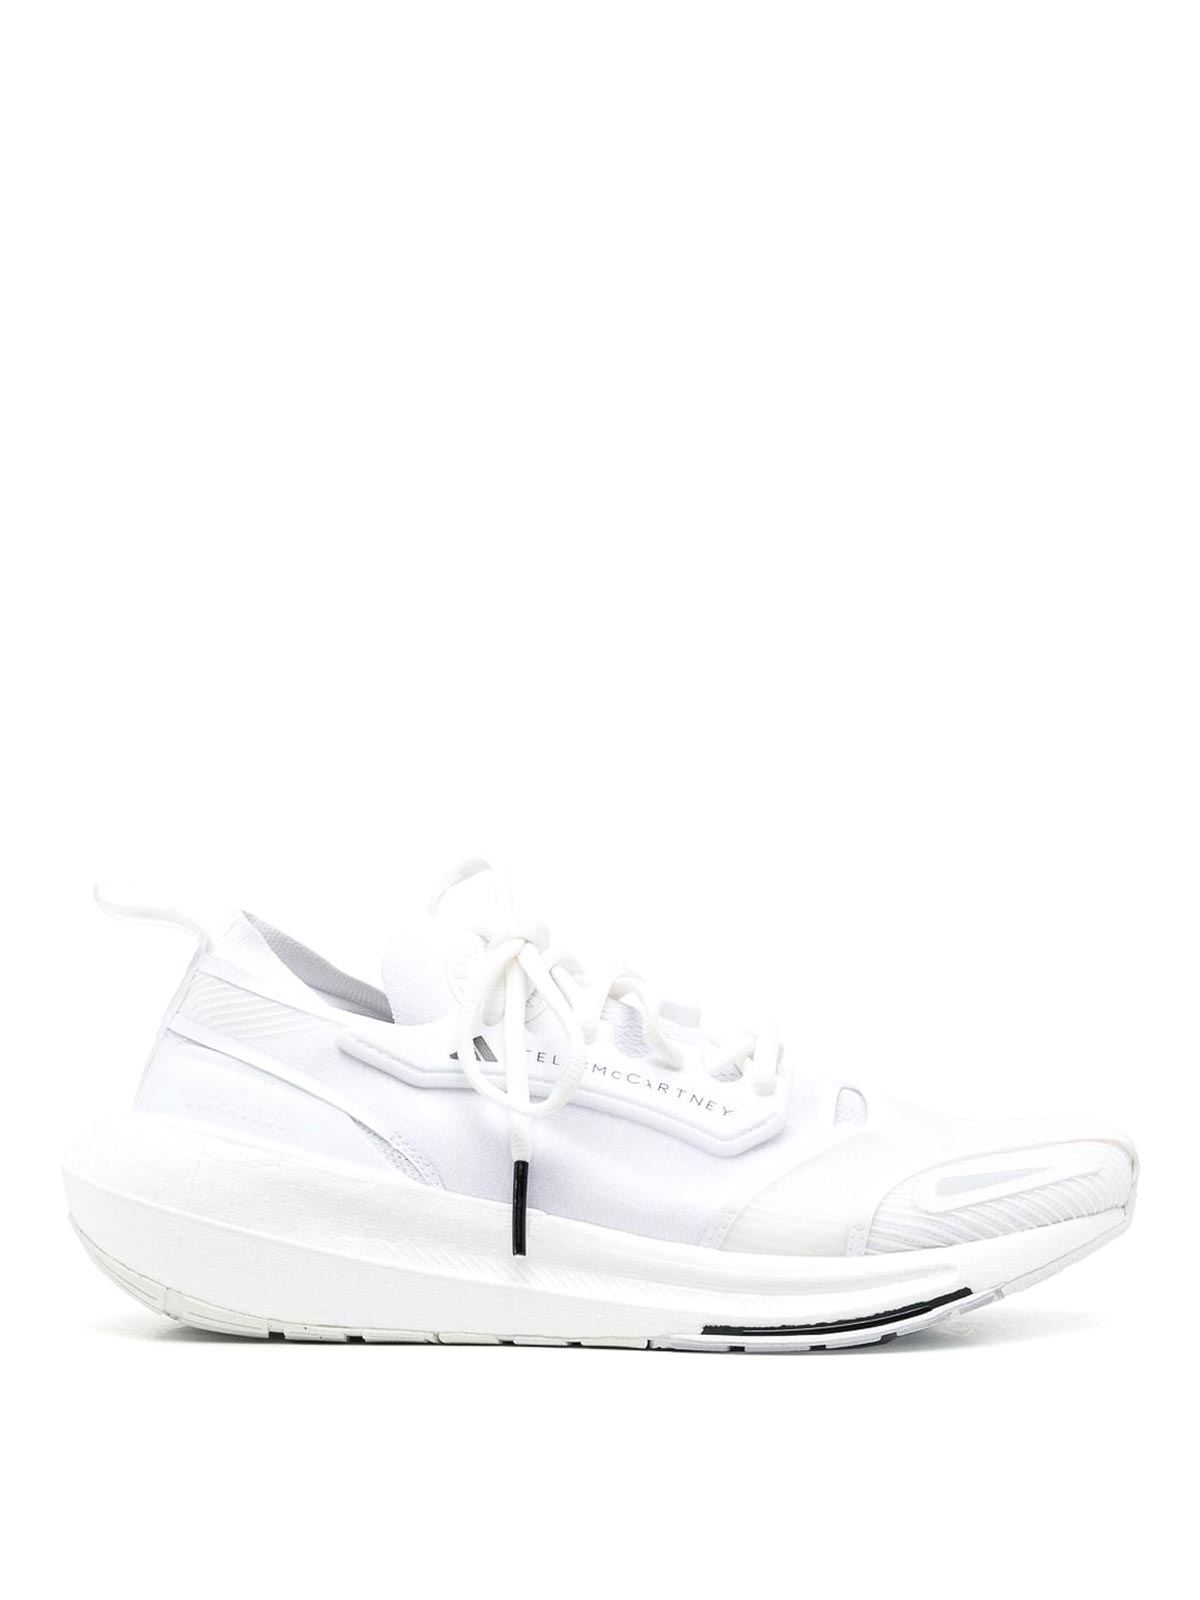 Adidas By Stella Mccartney Ultraboost 23 Trainers In White